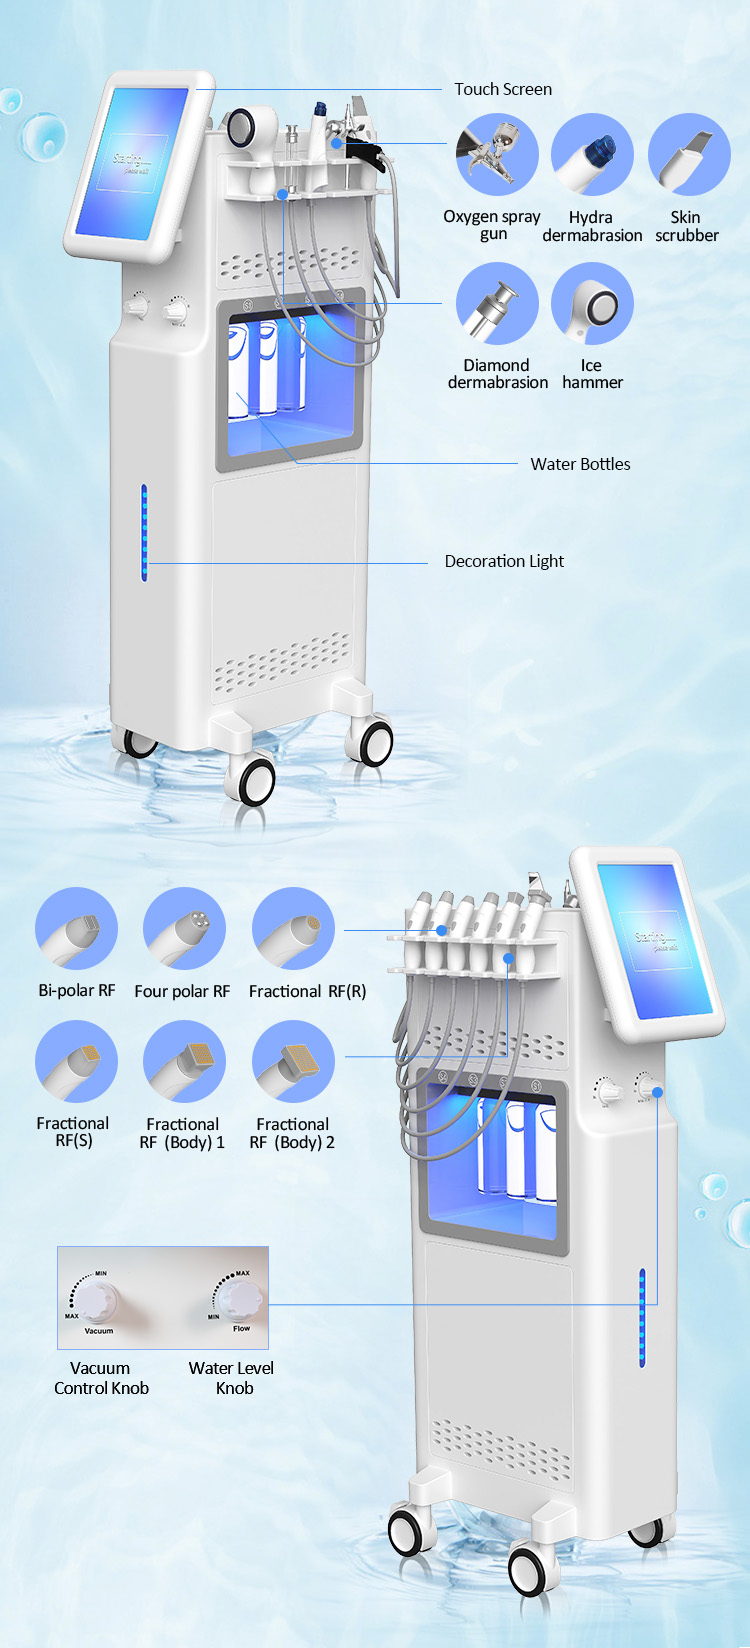 Factory Professional 11 in1 Face Spa Fractional RF Hydra Aqua Peel Facial Hydrodermabrasion Machine Skin Care Beauty Equipment New 11 in 1 Hydra Dermabrasion Machine Price hydra dermabrasion machine,hydra hacial machine,fractional rf machine